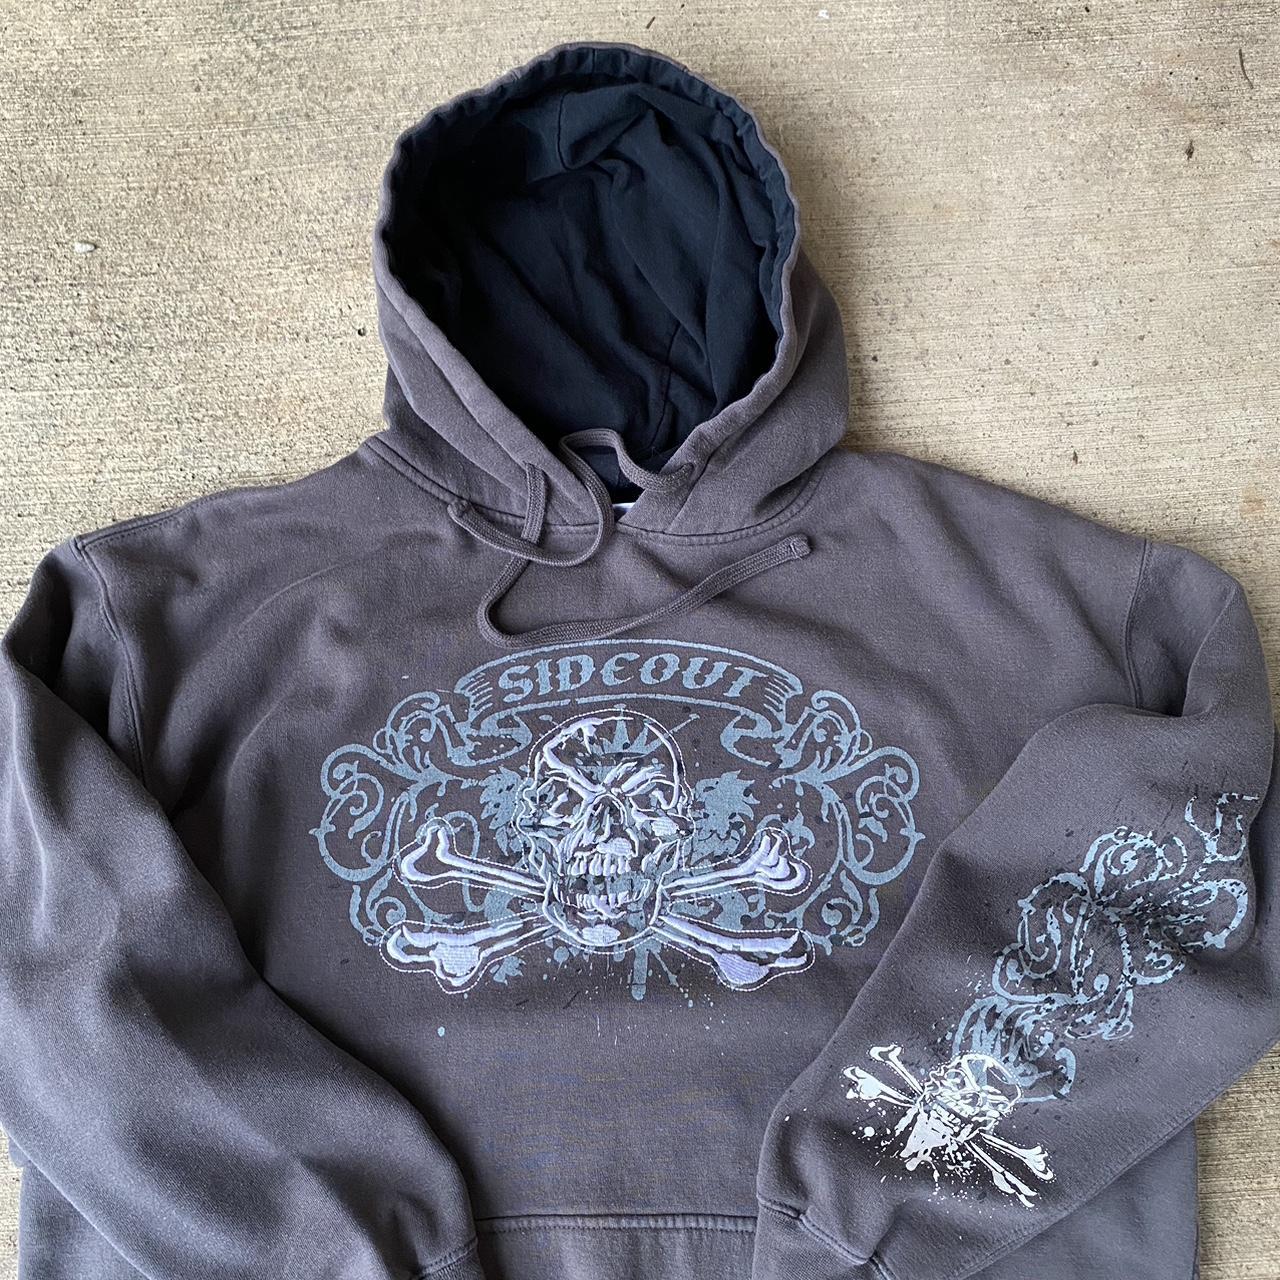 Mallgoth skull pullover hoodie Says L but fits - Depop